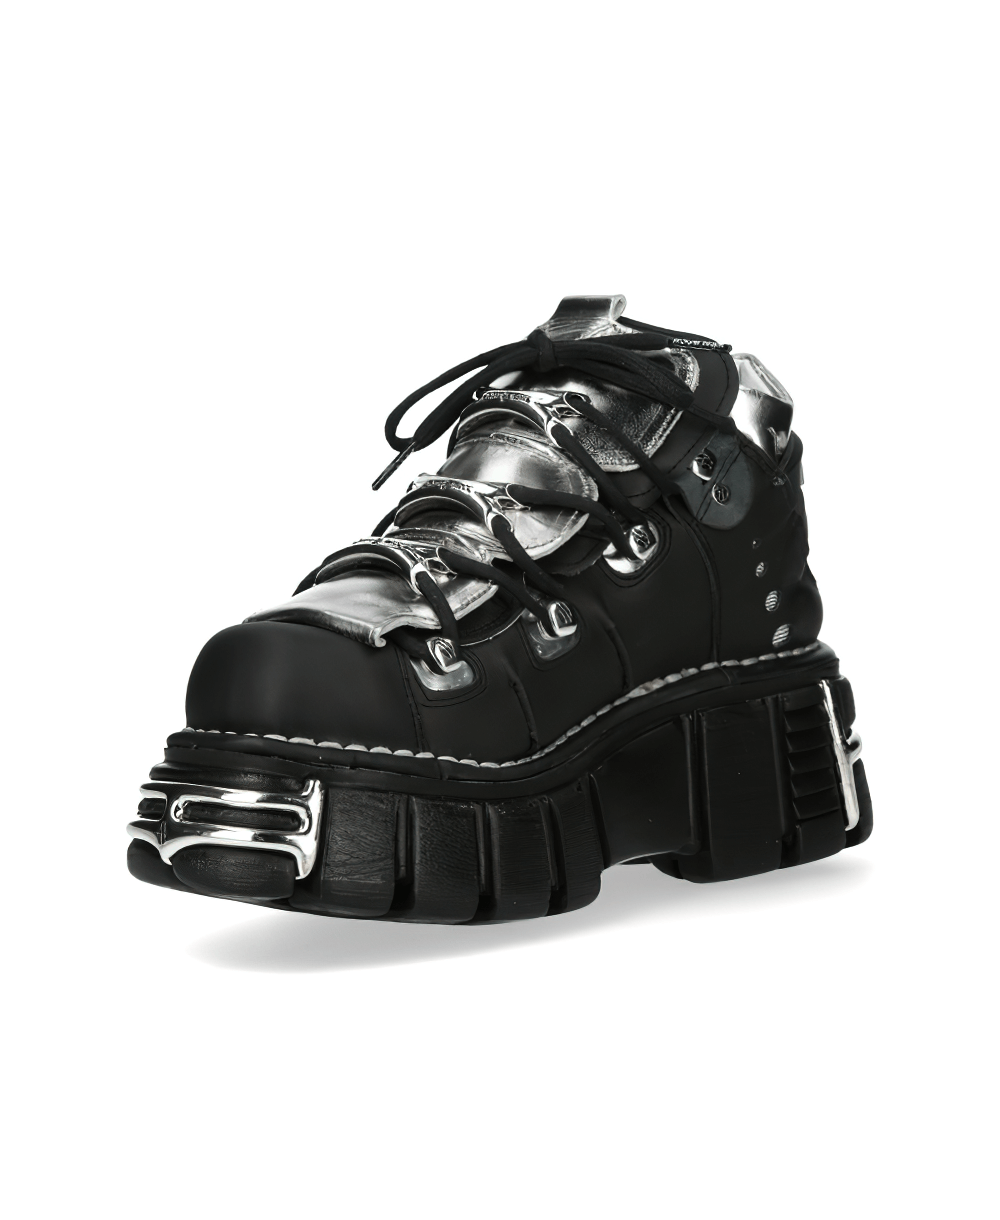 NEW ROCK Unisex Rugged Metal Lace-Up Ankle Boots